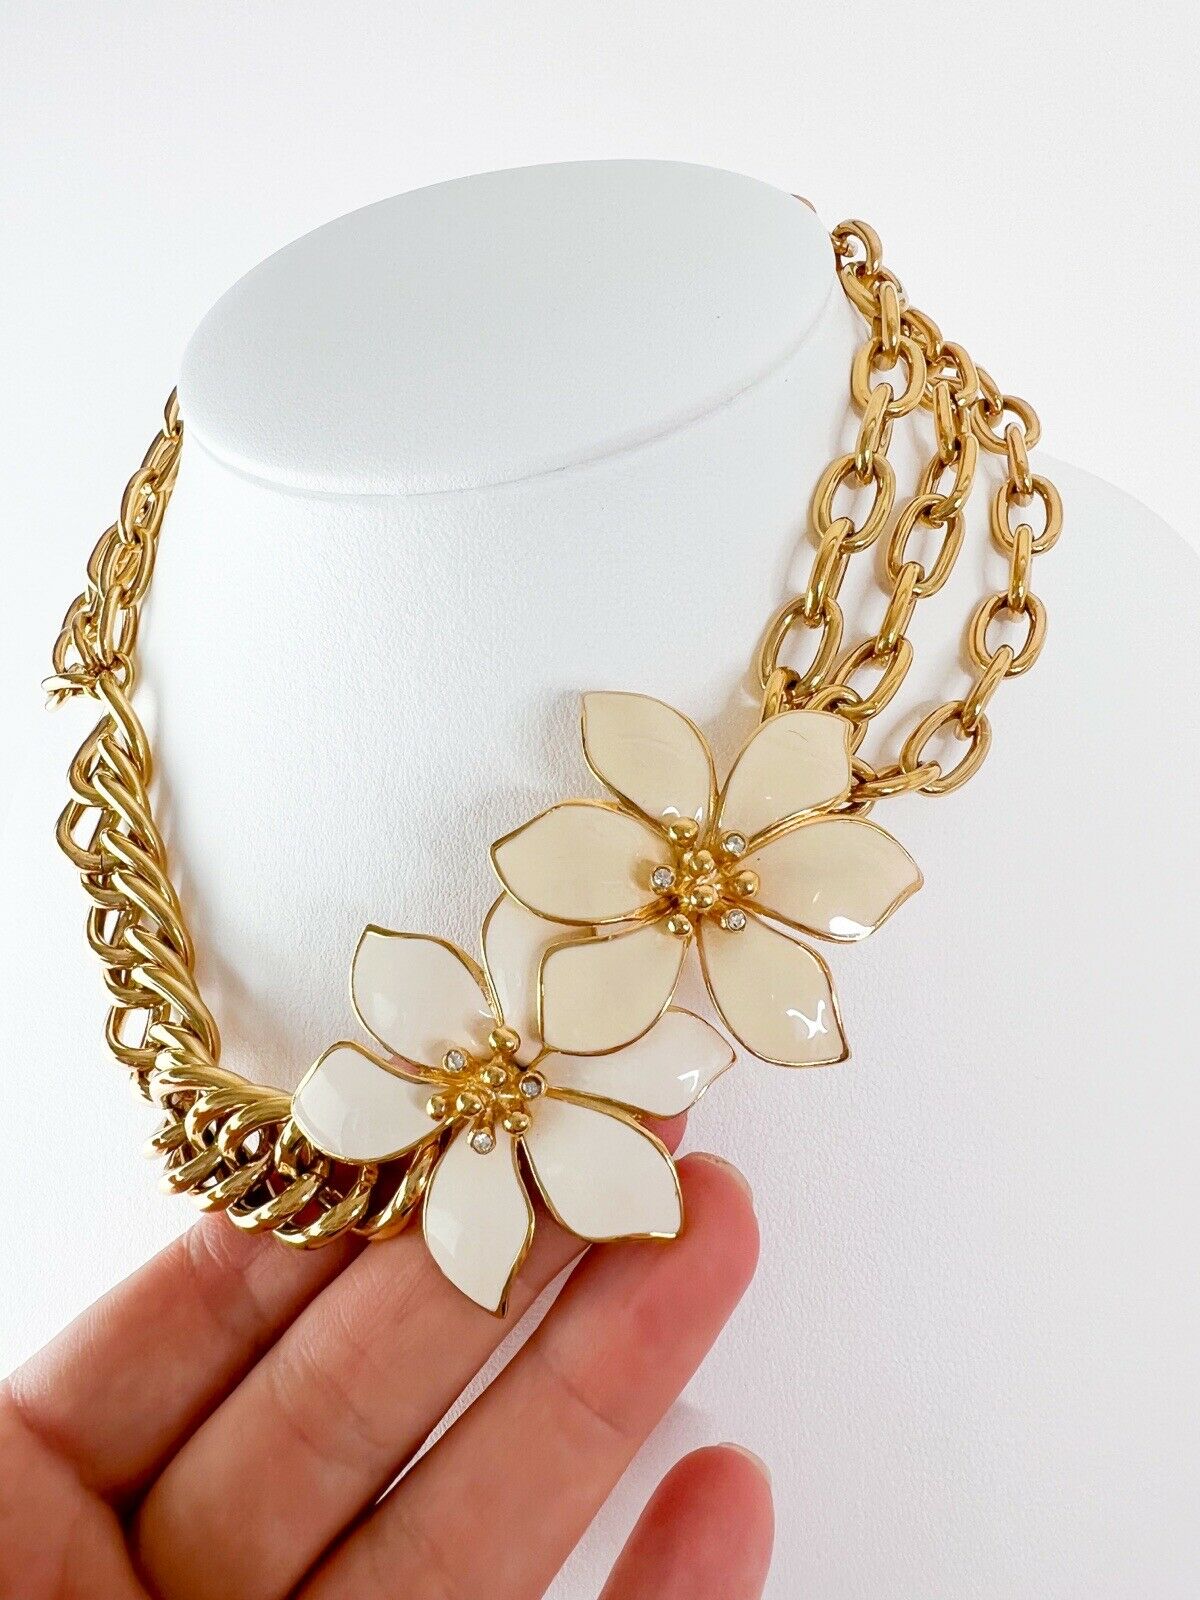 Givenchy Vintage Gold Tone Floral Choker Multi-Strand Necklace Large Chain